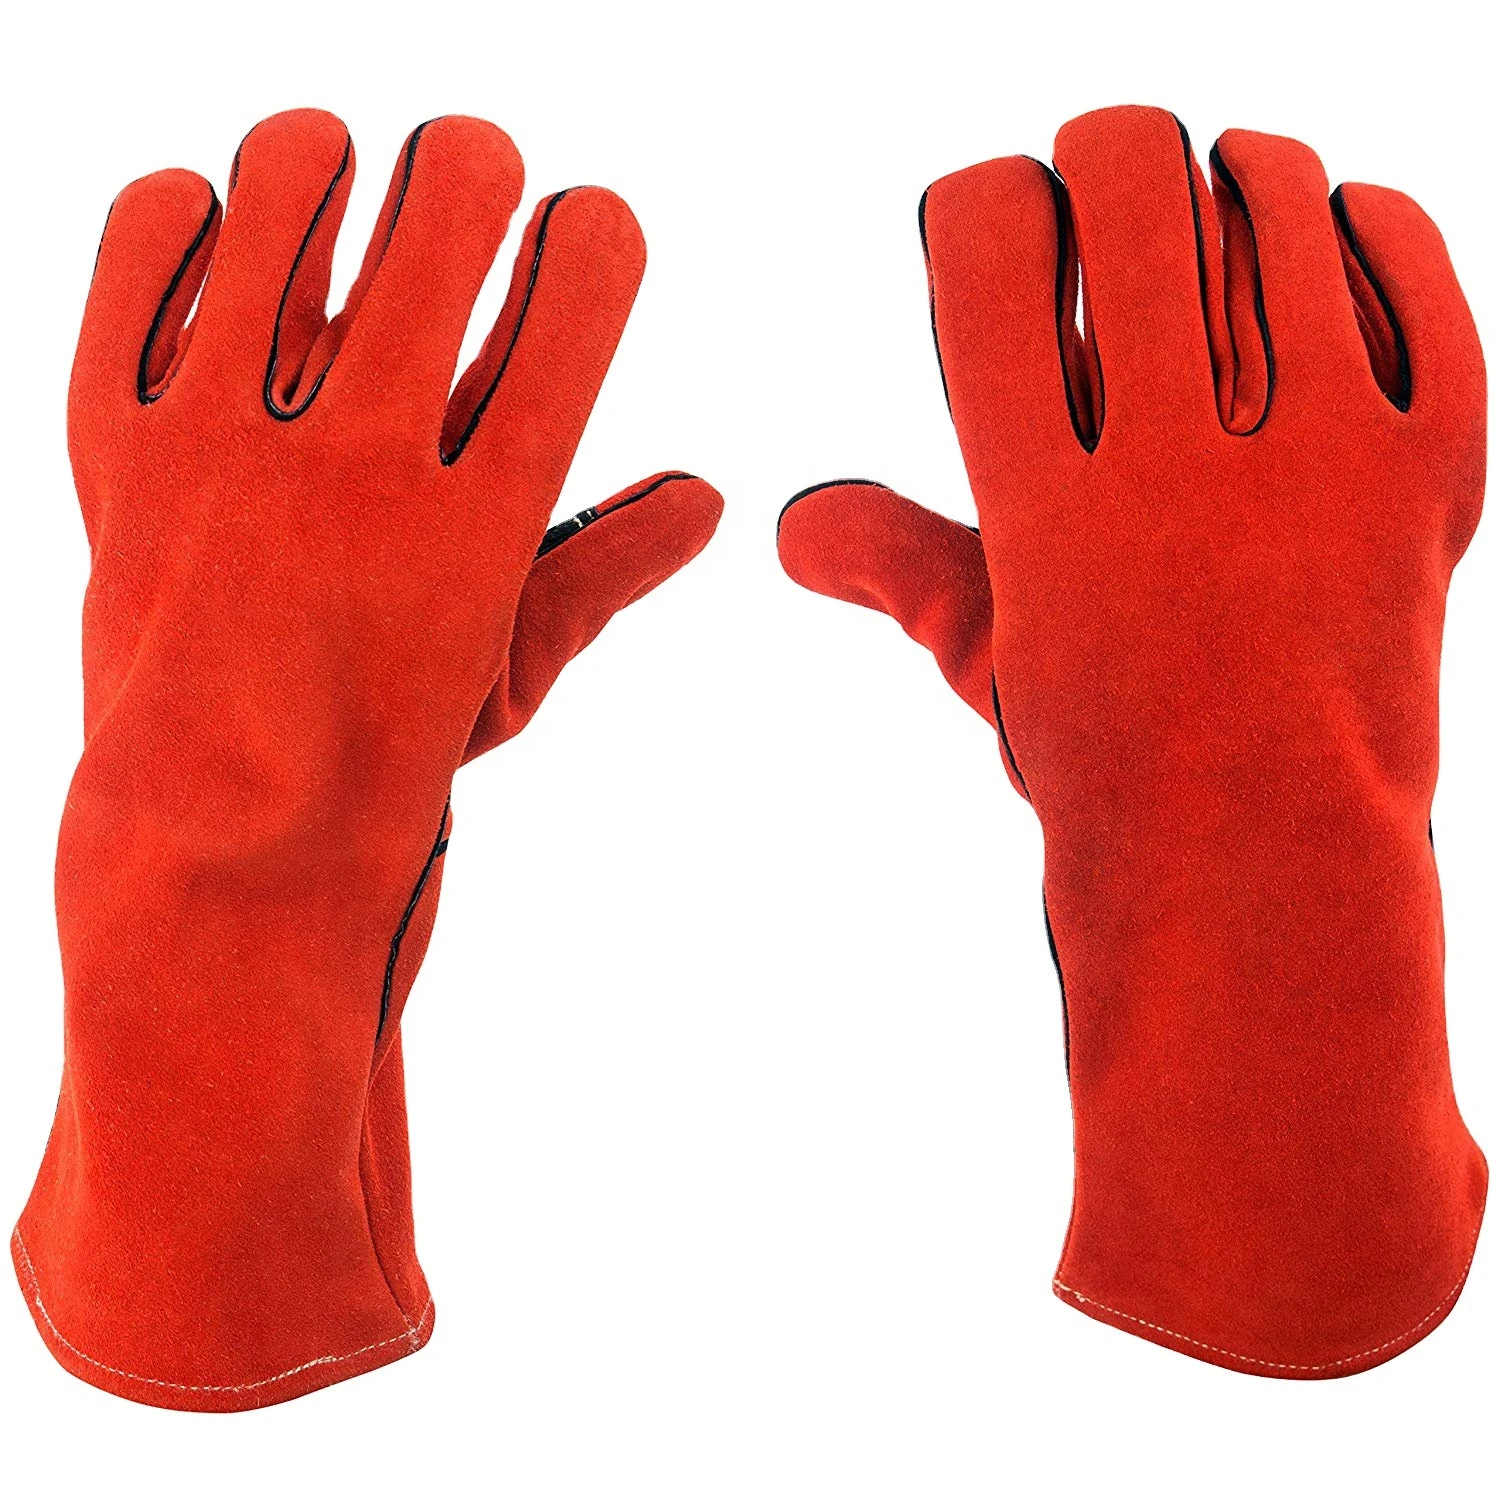 Swelder Hot Sale Leather Gloves Aprons Cloth Sleeves and Other Welding Equipment